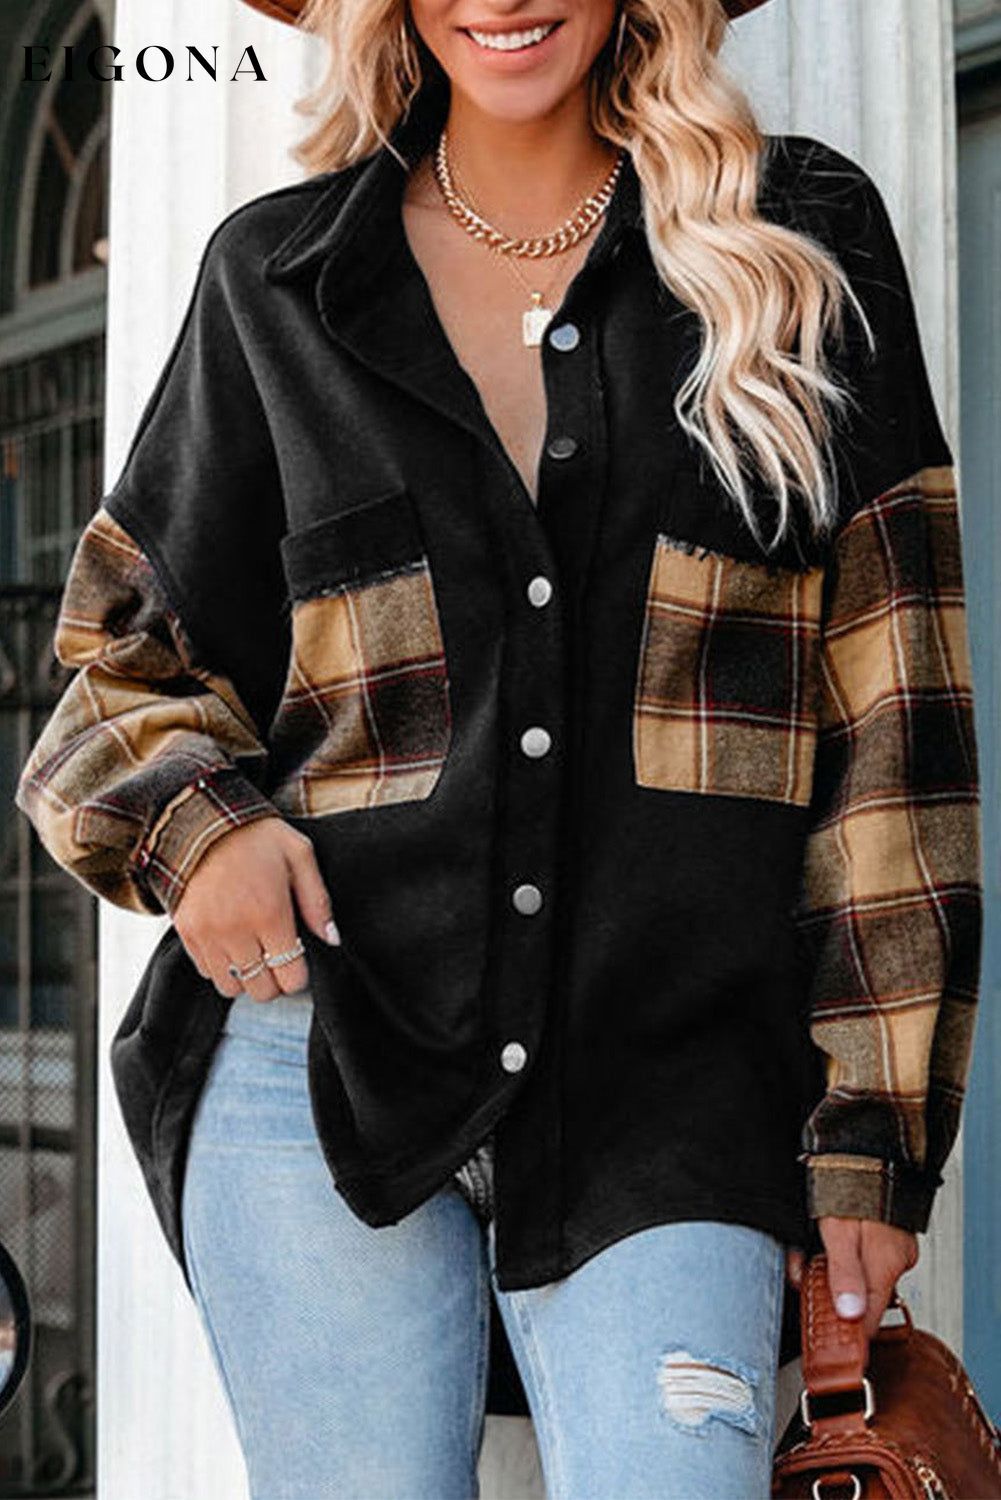 Black Plaid Patchwork Chest Pockets Oversized Shirt Jacket All In Stock Best Sellers Category Shacket clothes EDM Monthly Recomend Hot picks long sleeve shirts Occasion Daily oversized shirt Print Plaid Season Fall & Autumn shirt shirts Style Western top tops